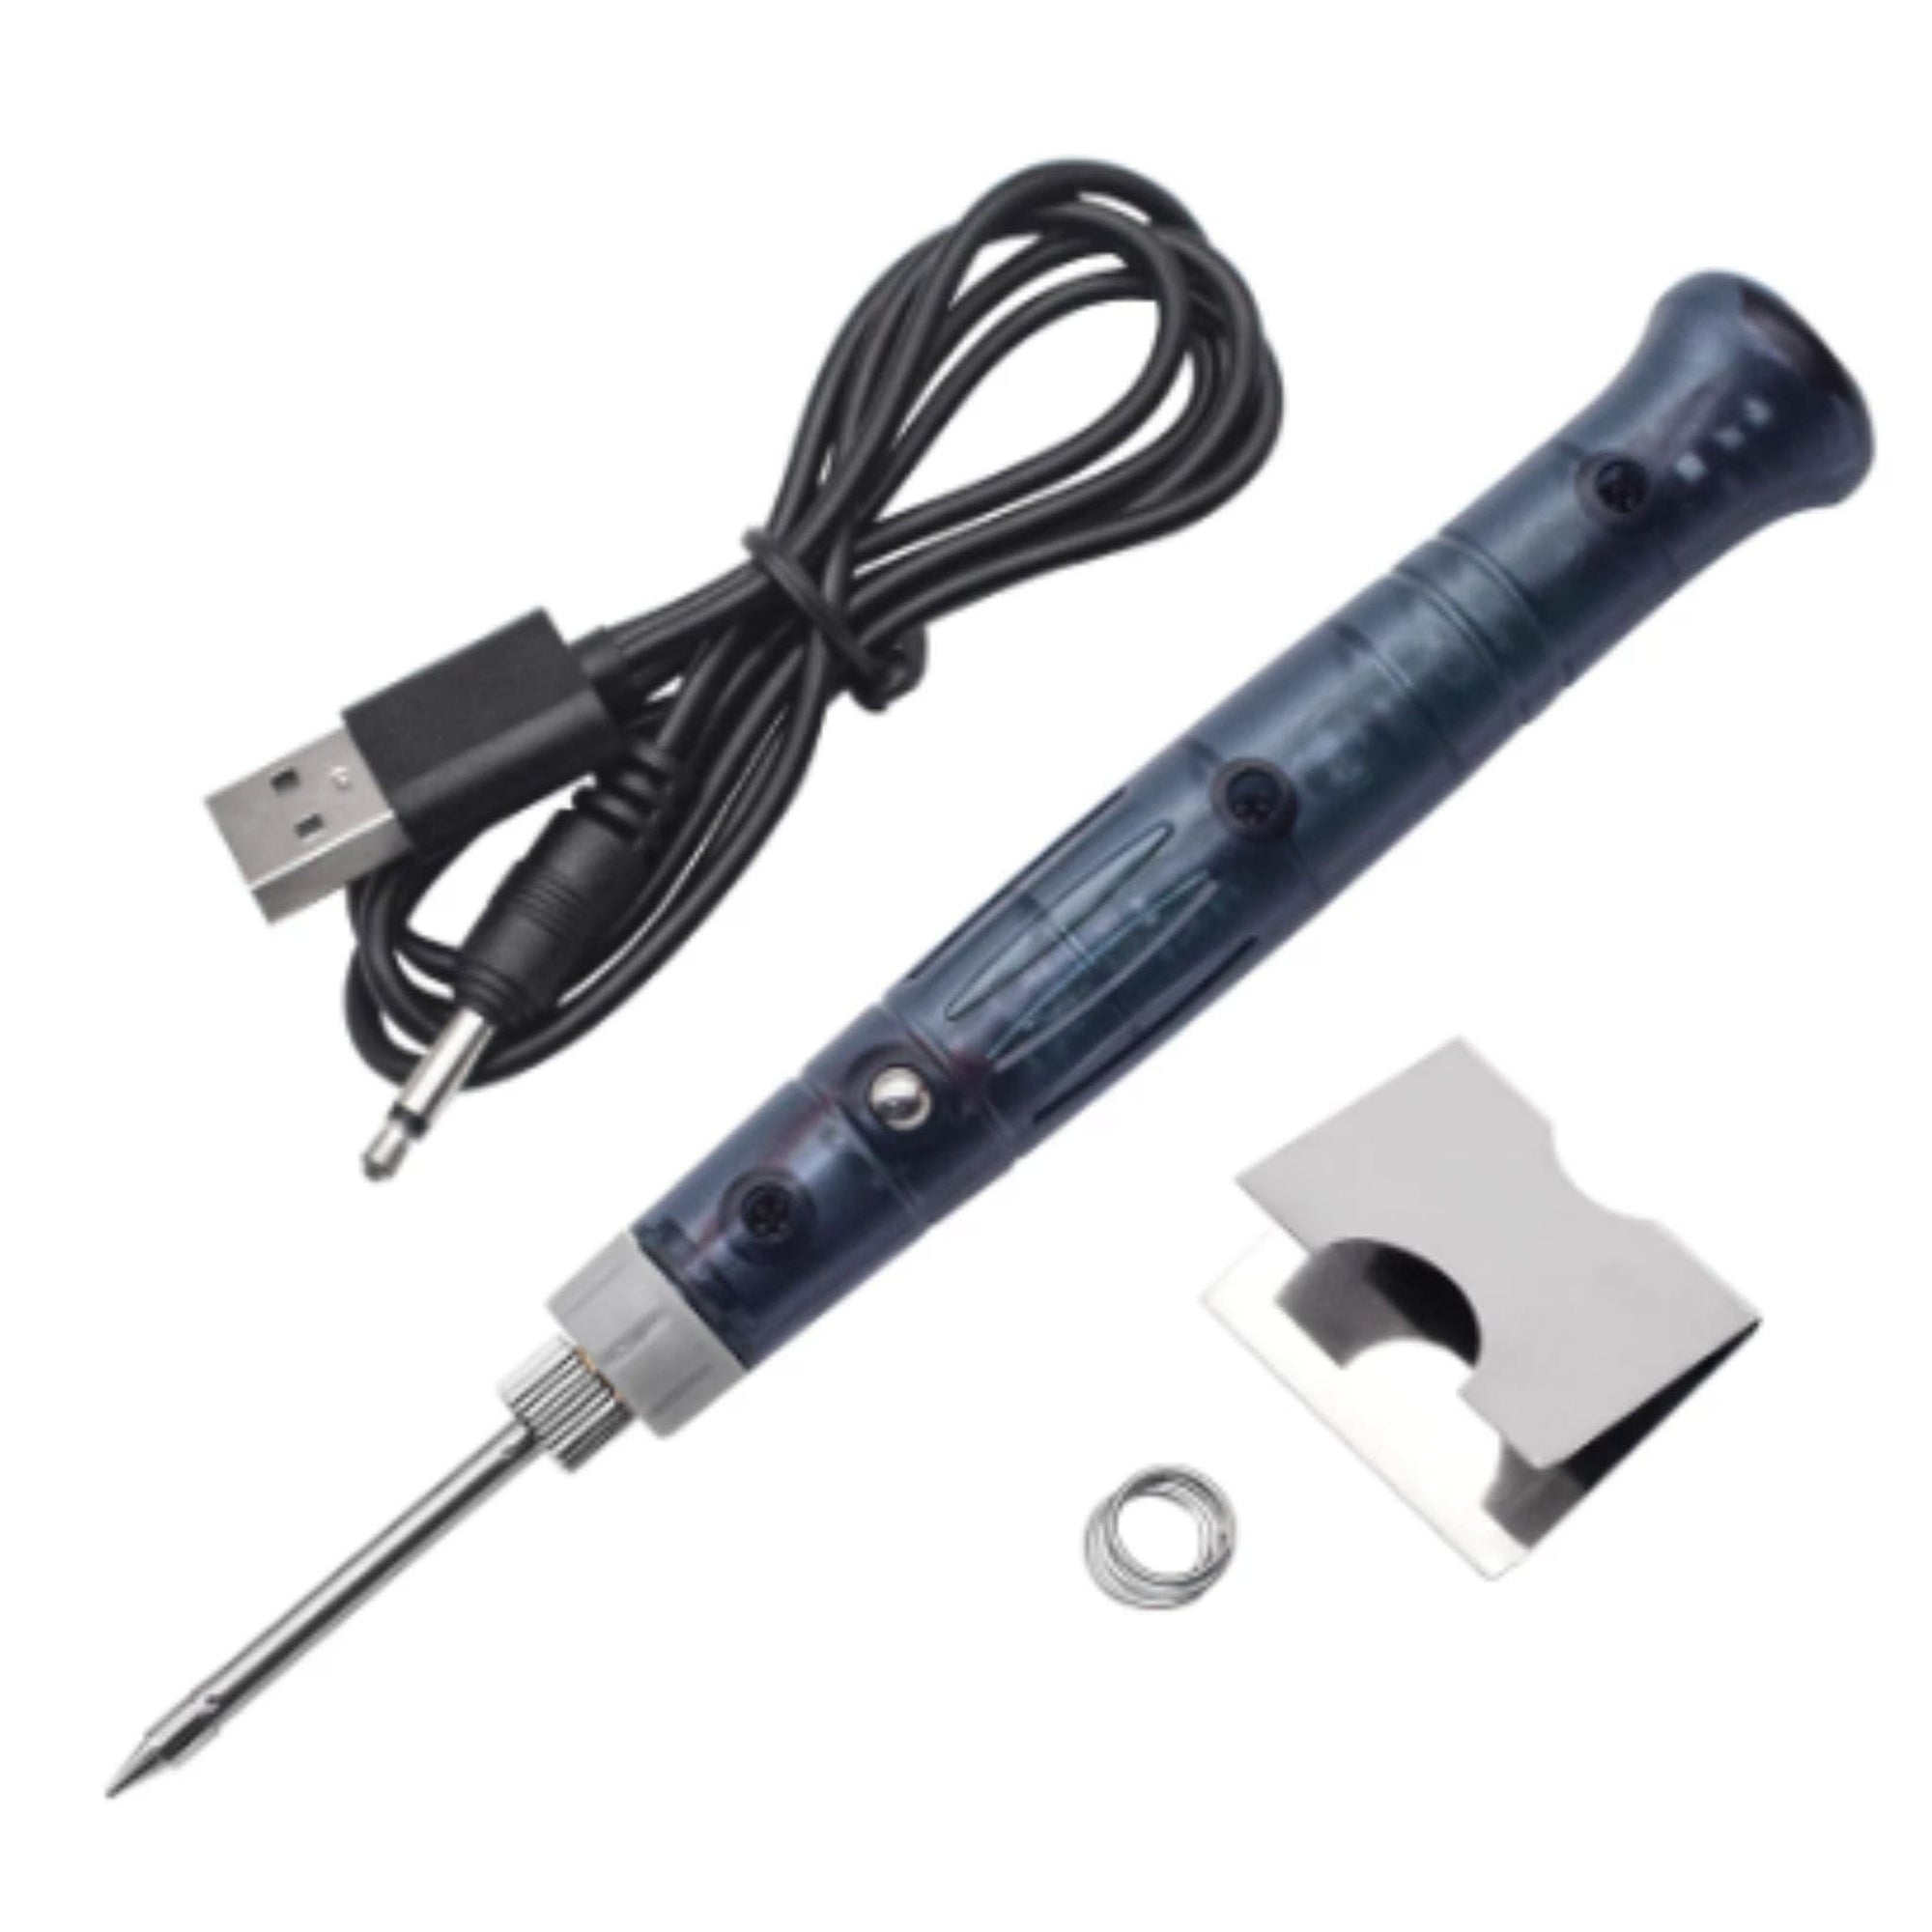 USB Soldering Iron - South East Clearance Centre